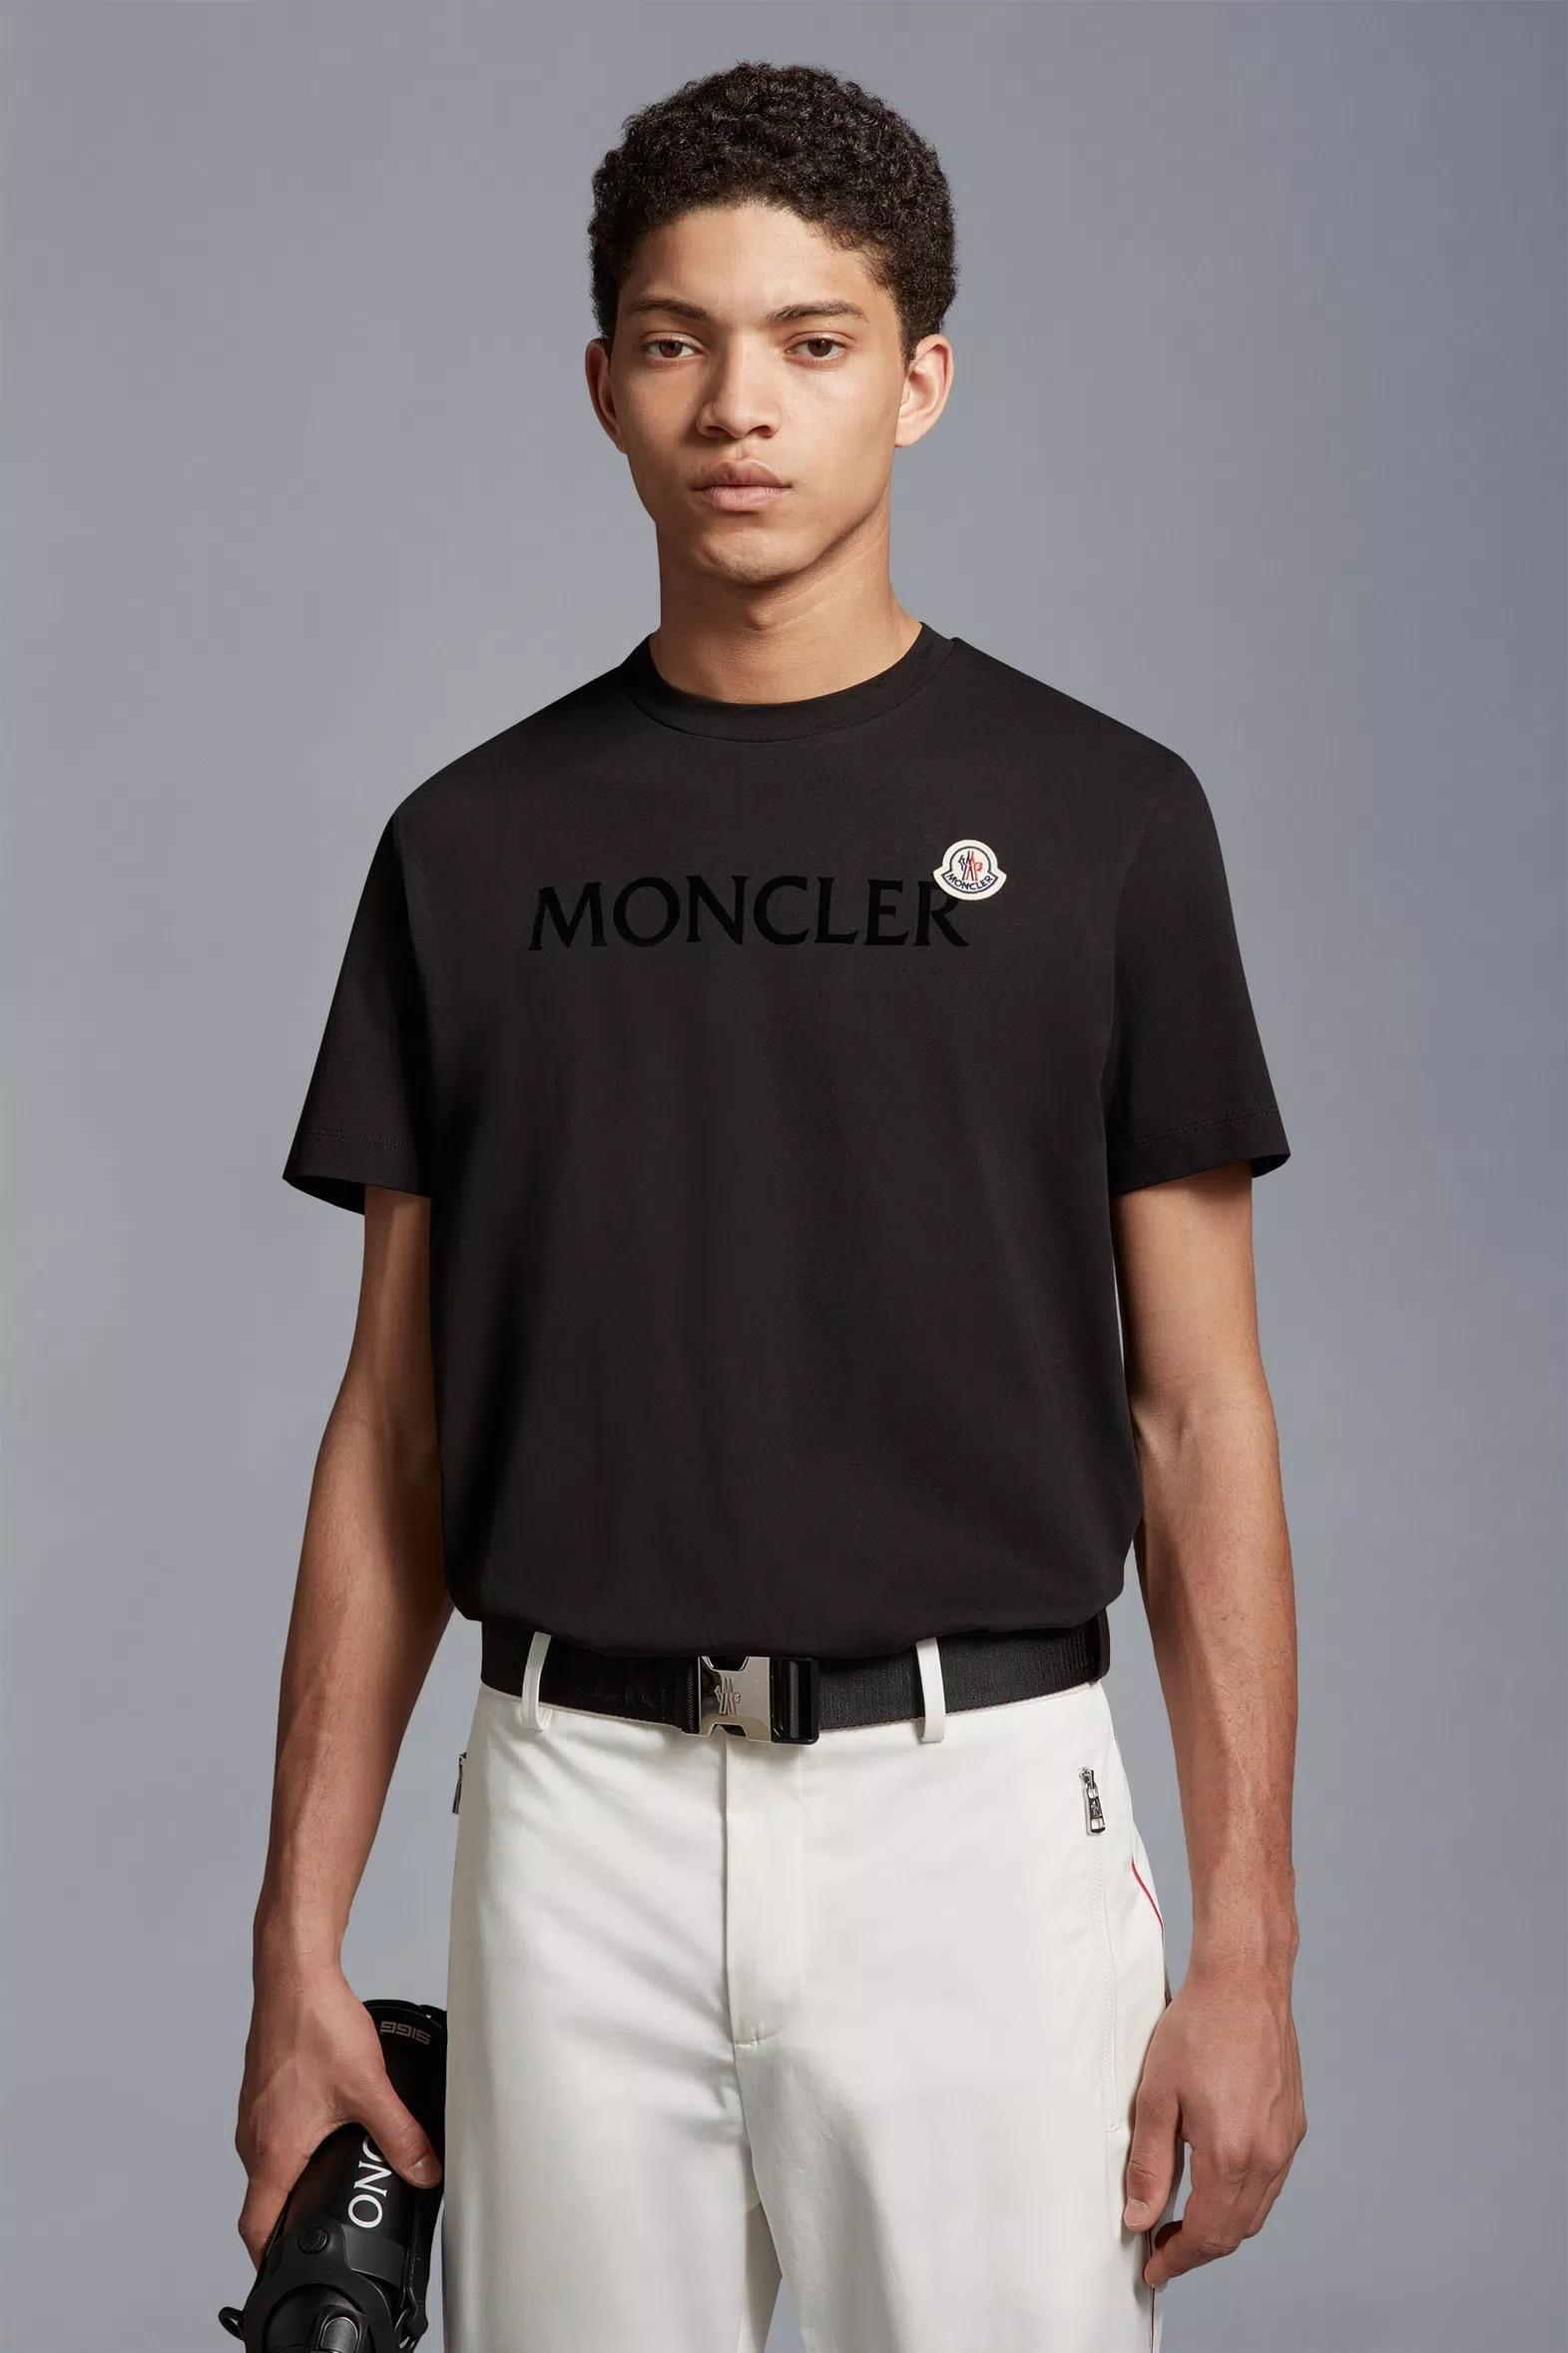 MONCLER T-SHIRT モンクレール Tシャツ 正規取扱店 公式通販 送料無料